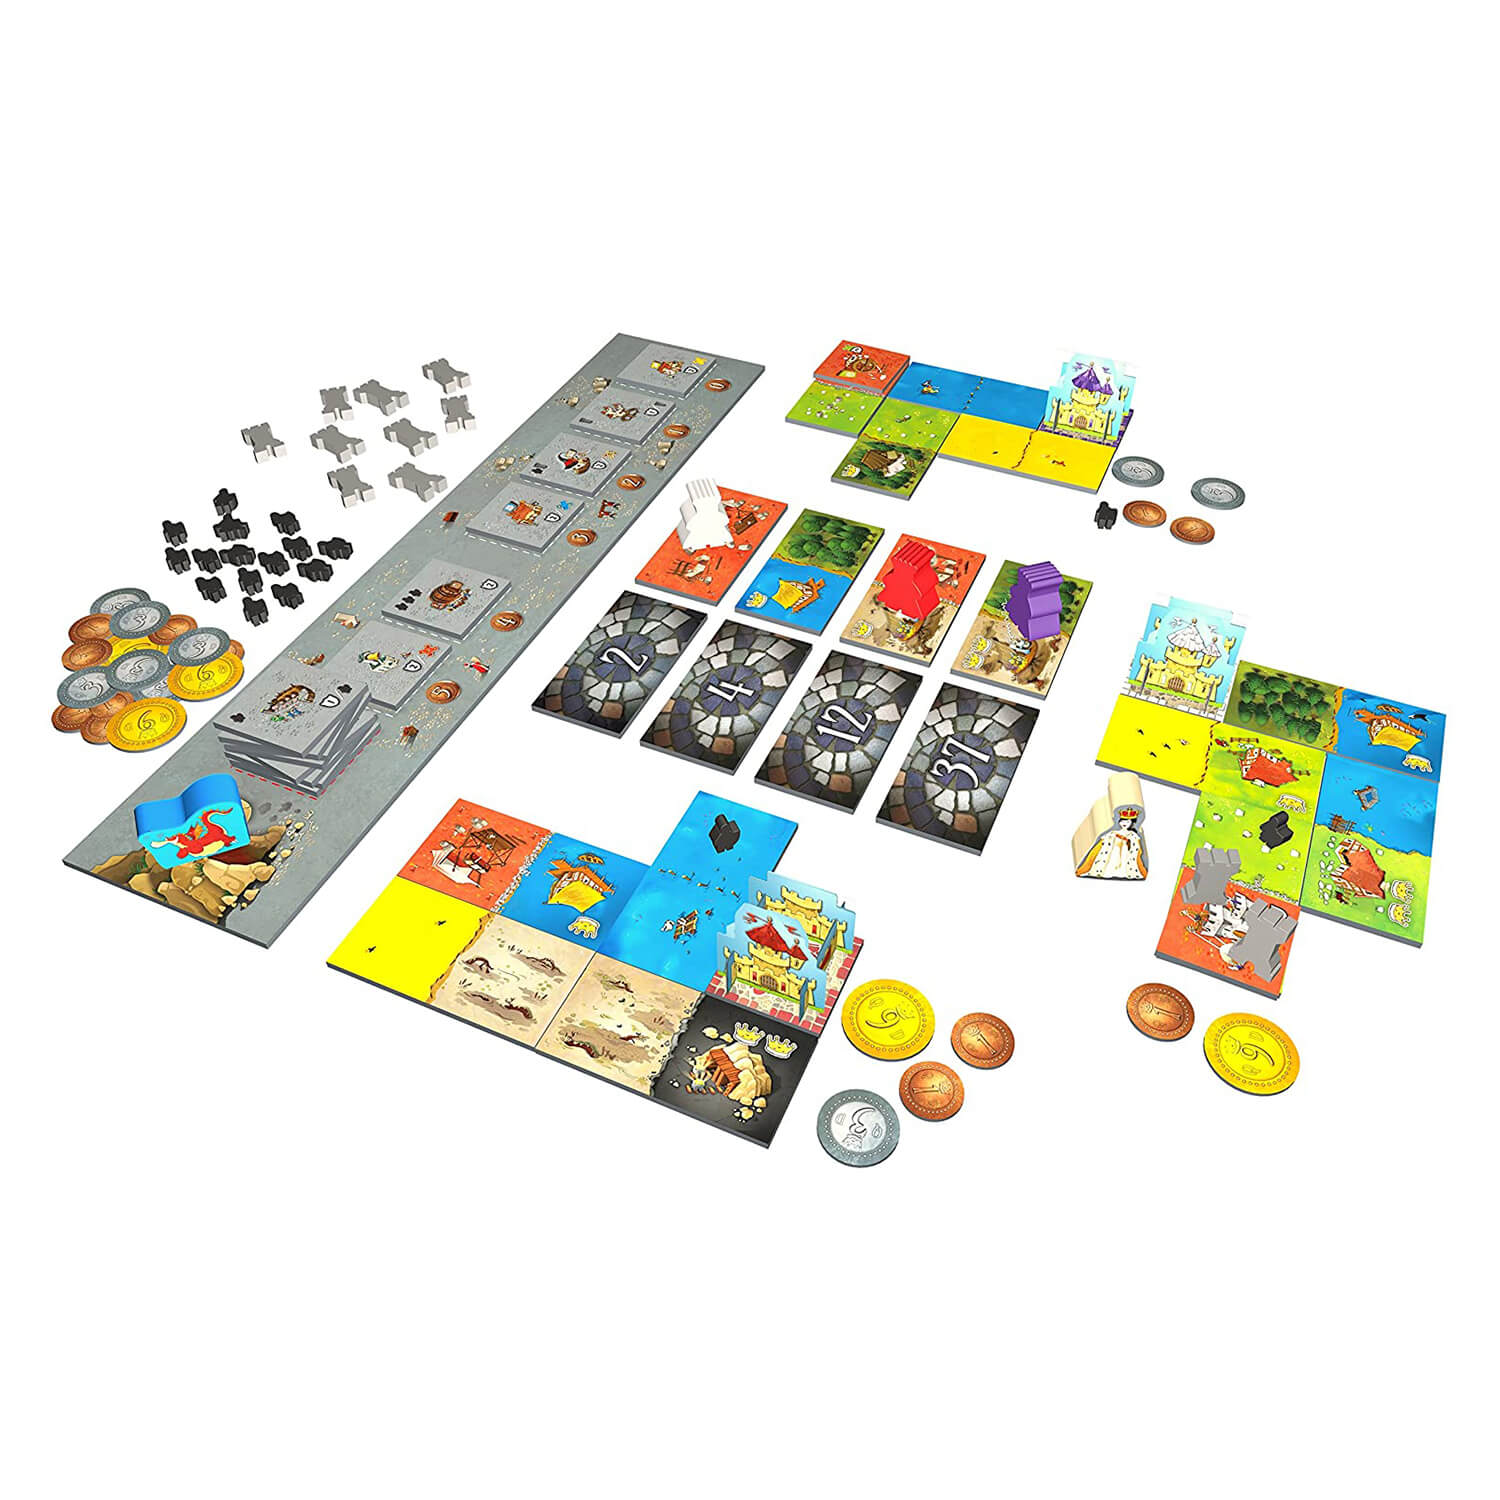 Top down view of all pieces and cards included in the Blue Orange Queendomino Game.